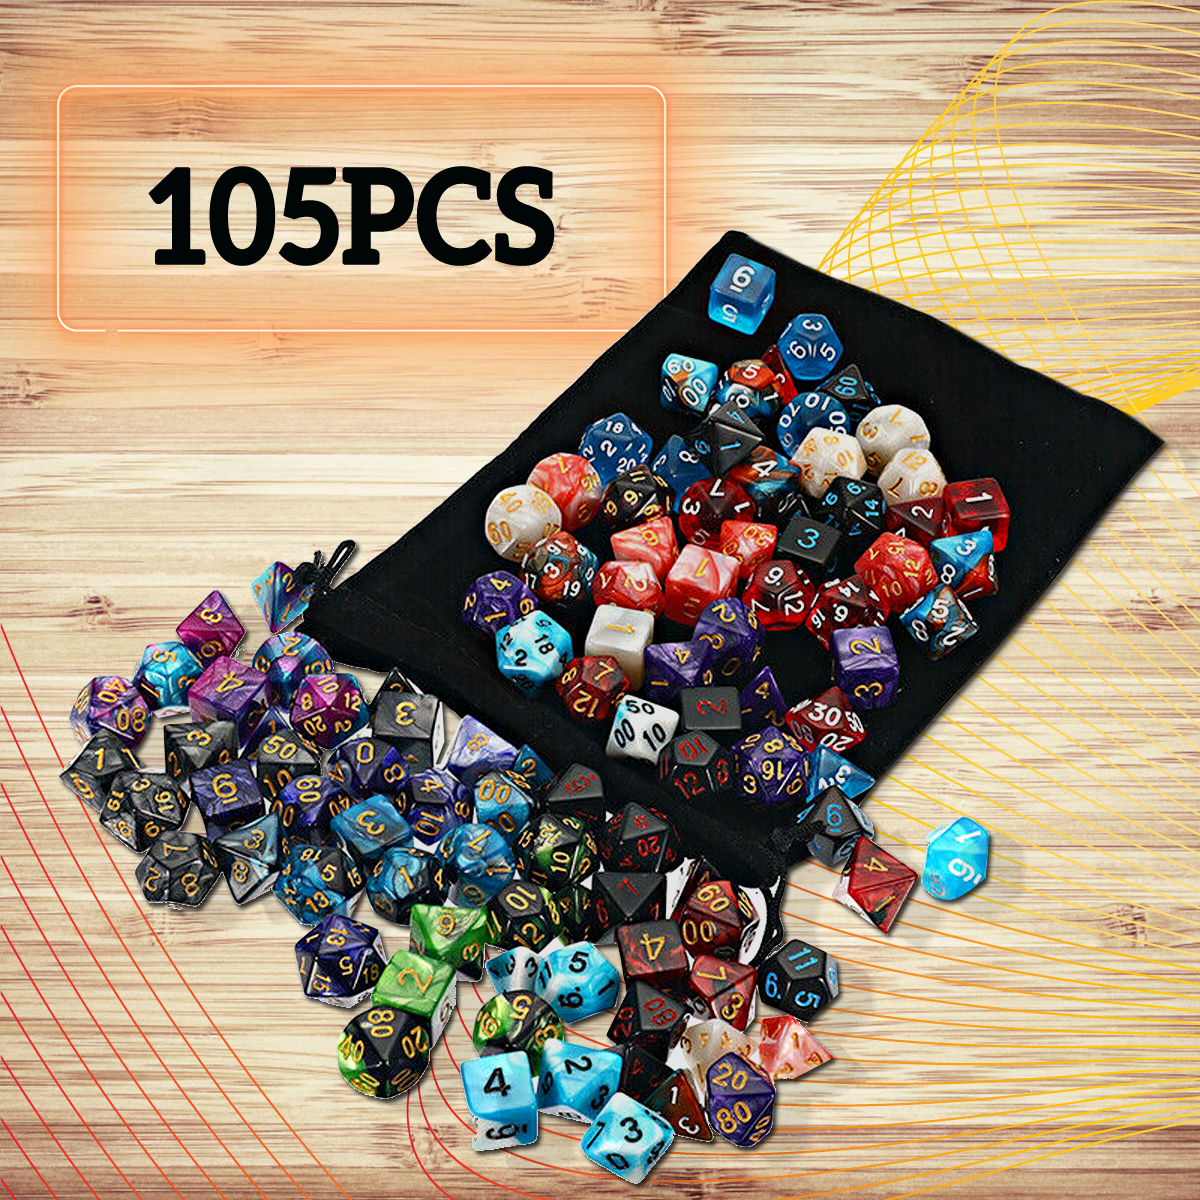 105-Pcs-Dice-Set-Polyhedral-Dices-7-Color-Role-Playing-Table-Game-With-Cloth-Game-Multi-sied-Dice-1574100-1